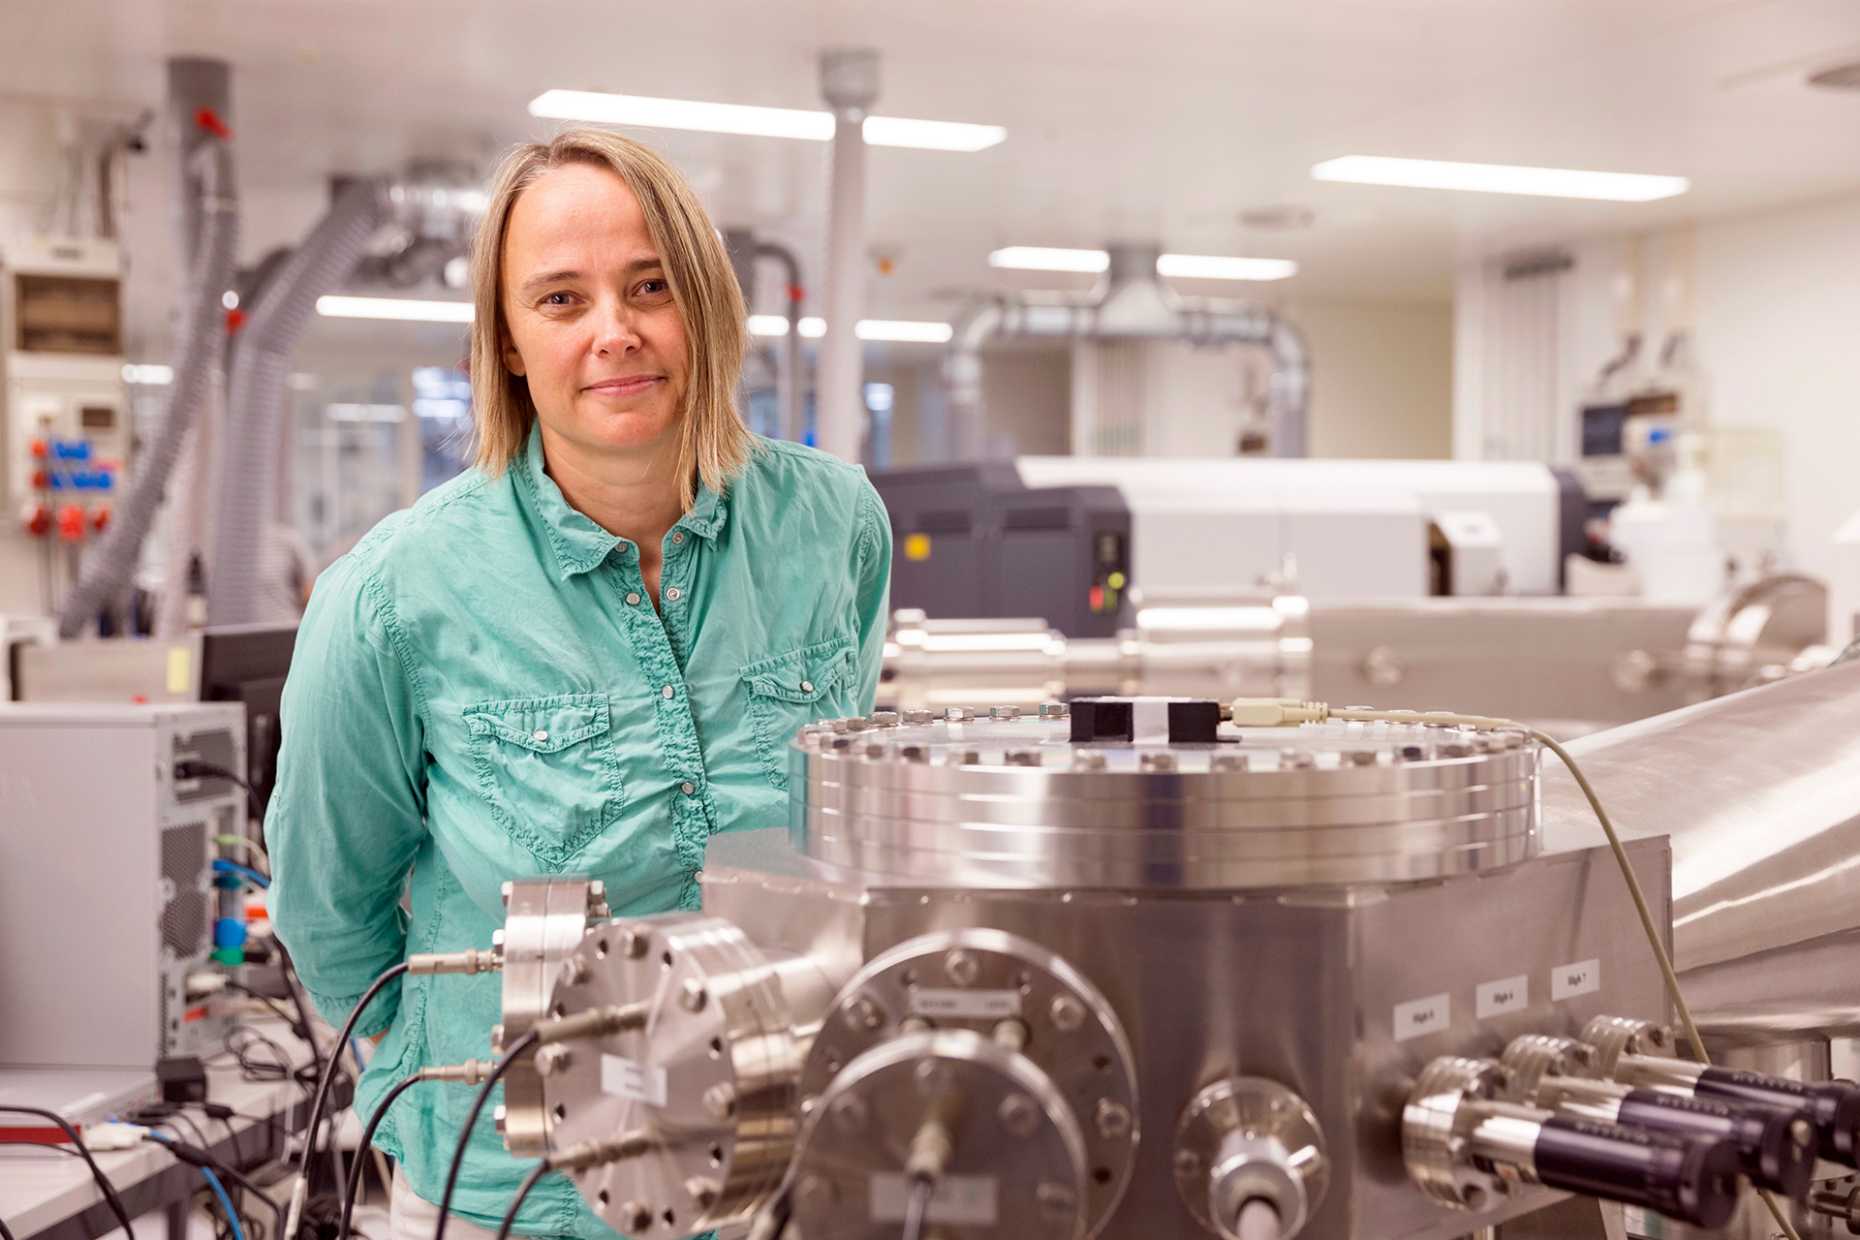 Enlarged view: Prof. Maria Schönbächler in the Laboratory of Mass Spectrometry at the Institute of Geochemistry and Petrology at ETH Zurich. (Photo: Alessandro Della Bella)